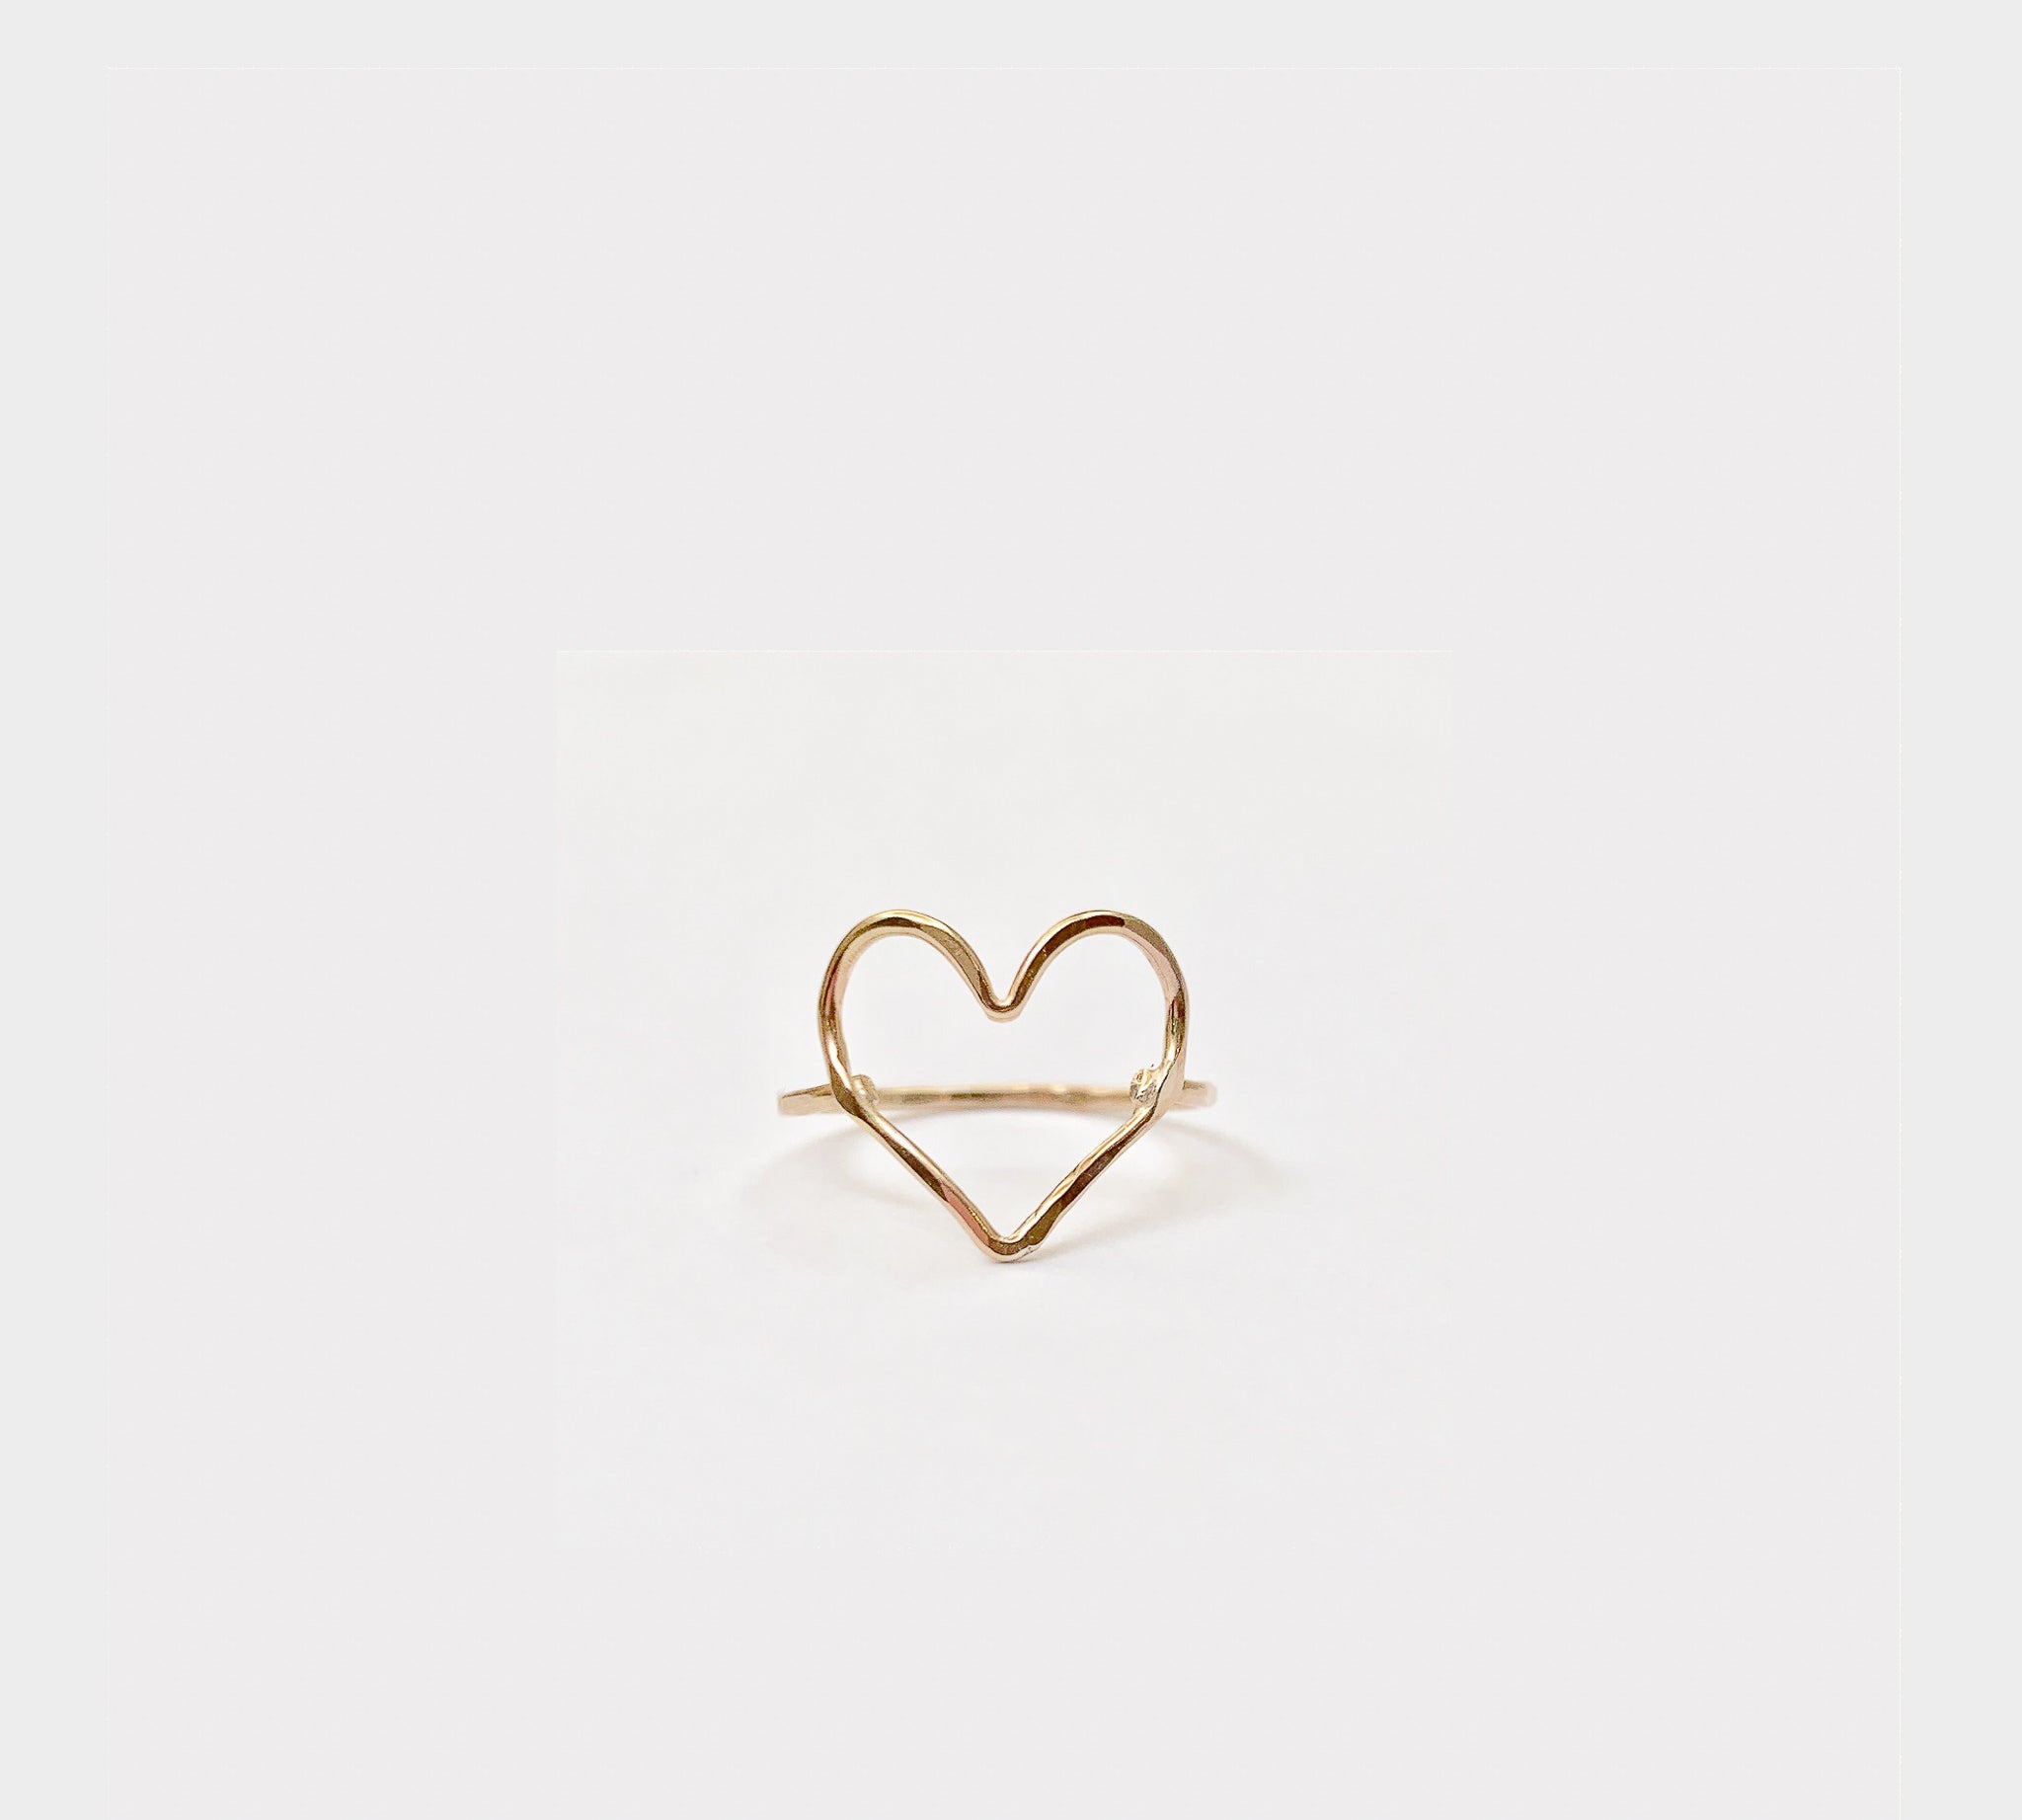 'I Love You' Ring, featured image